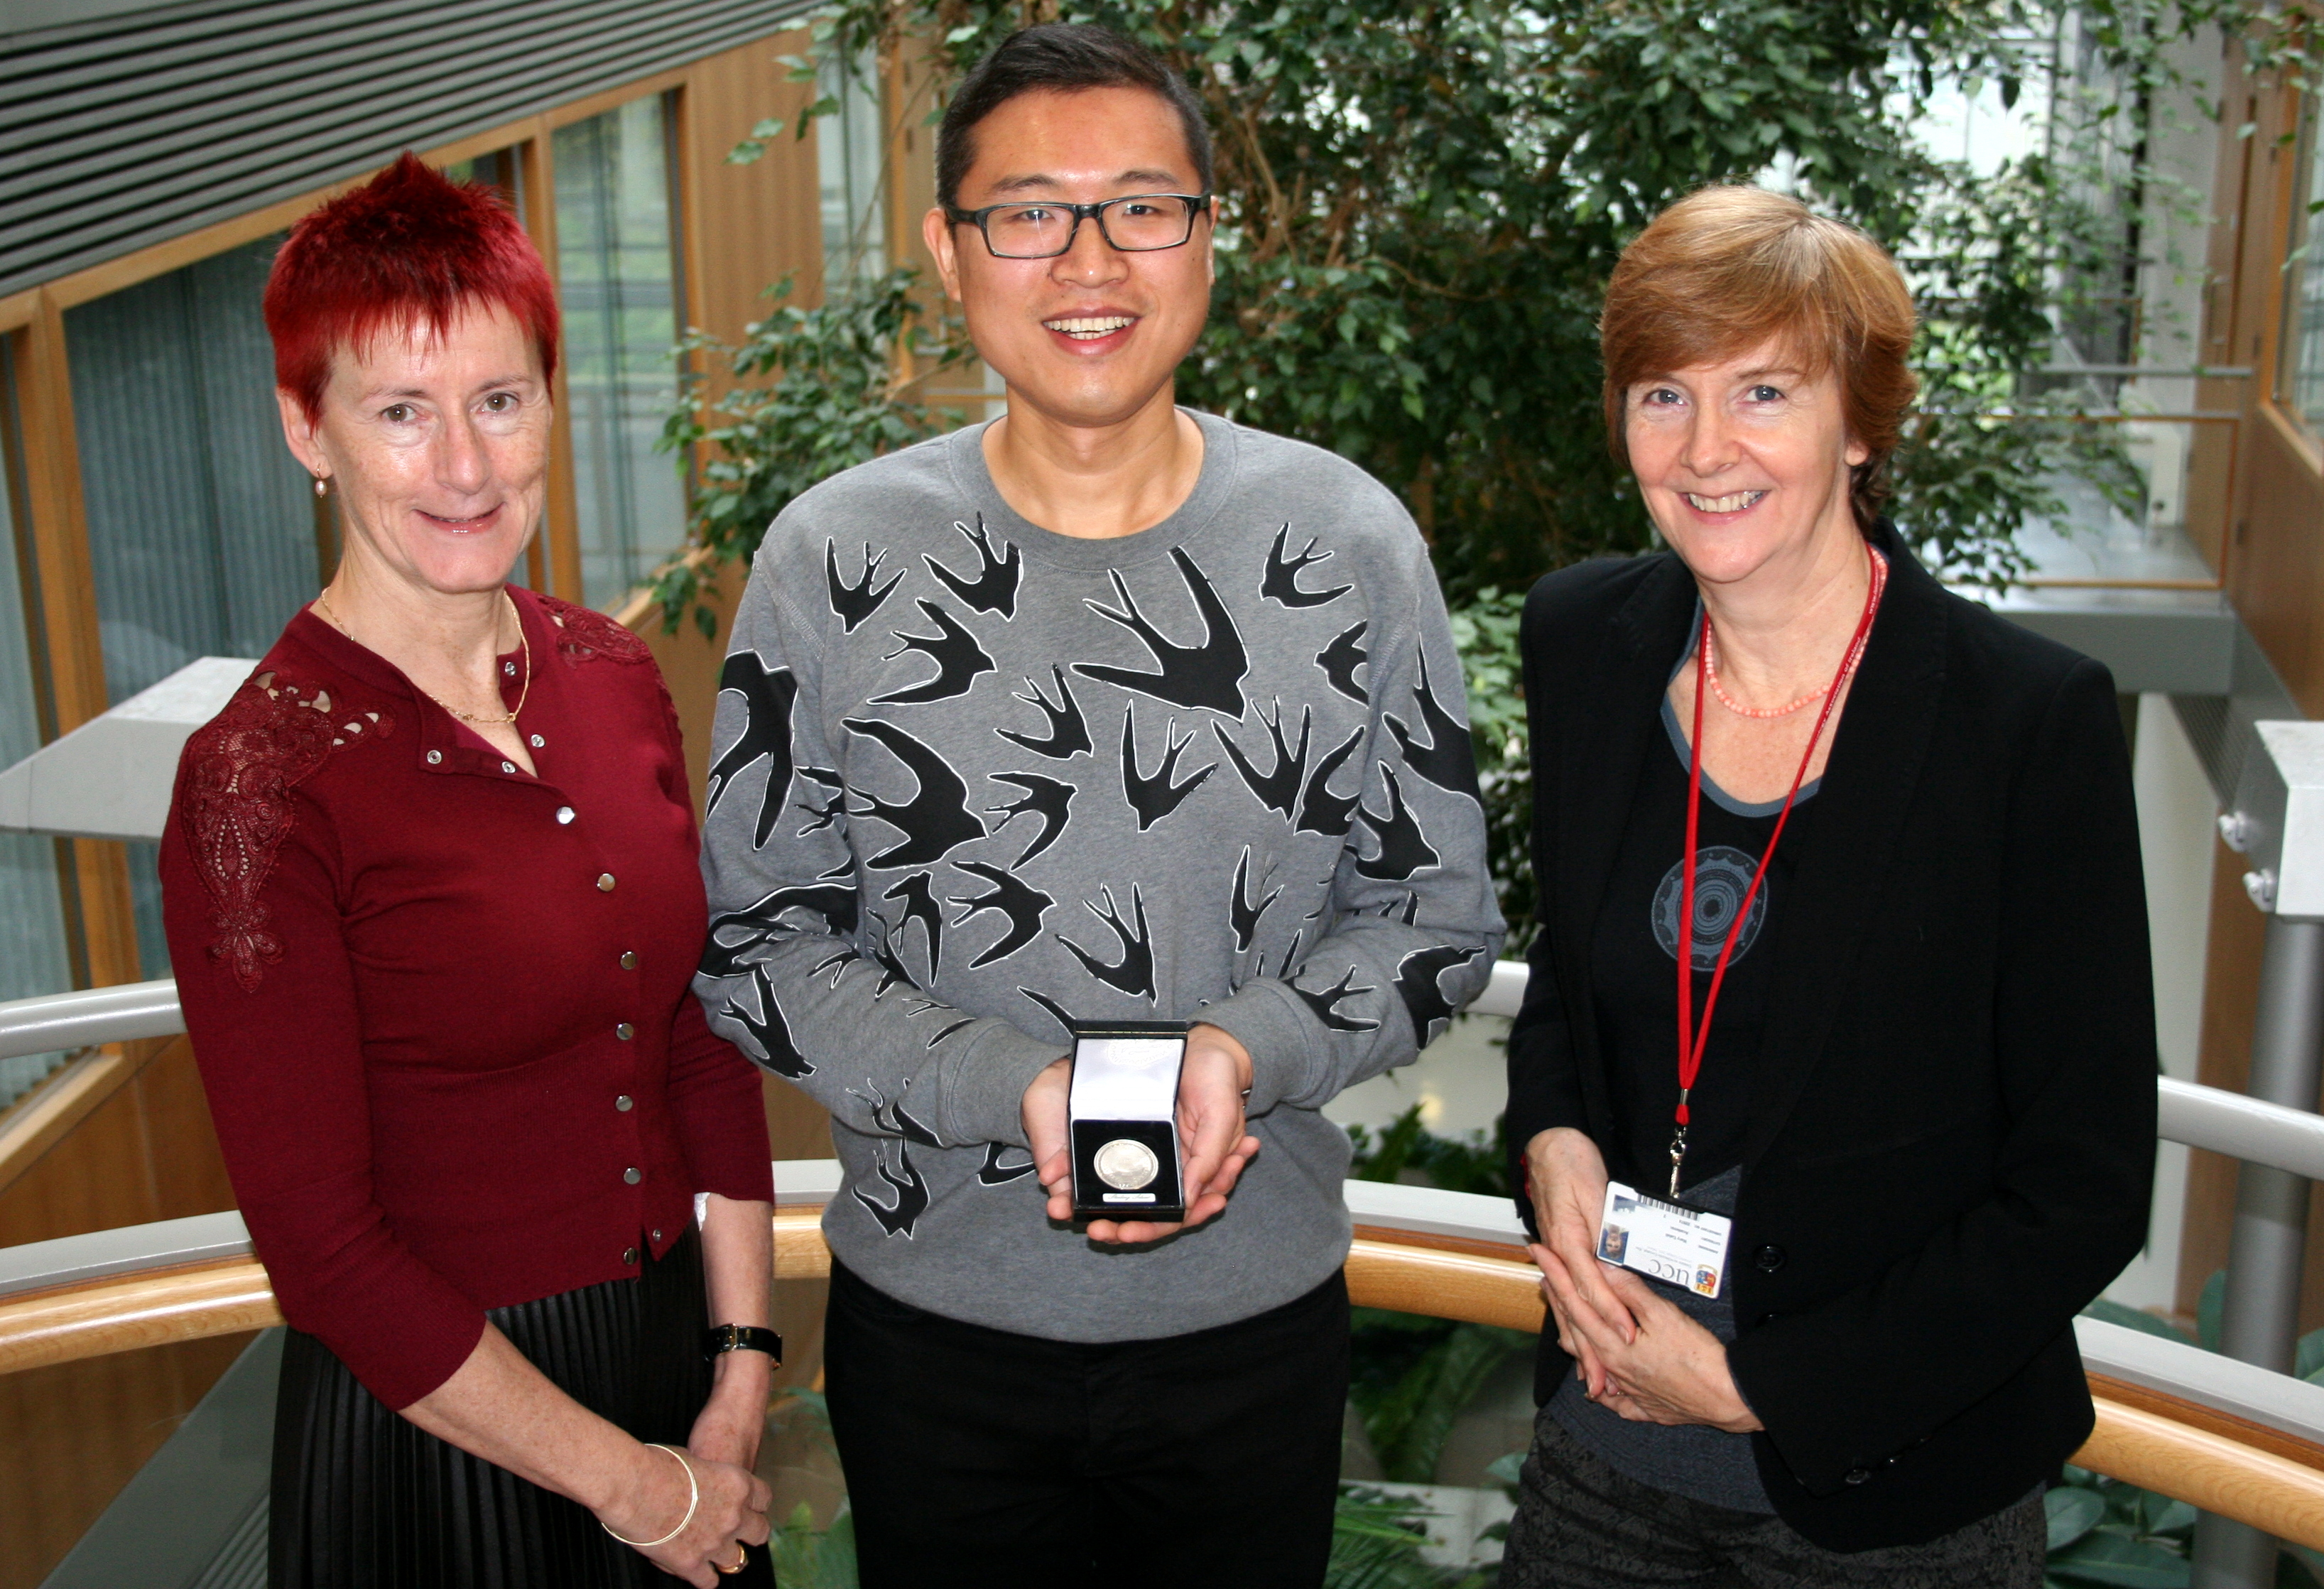 Dr Jianfeng Guo was awarded the 2015 Novartis-HAI Fellowship at the Haematology Association of Ireland (HAI) Annual Meeting in Galway on Saturday 17th October.